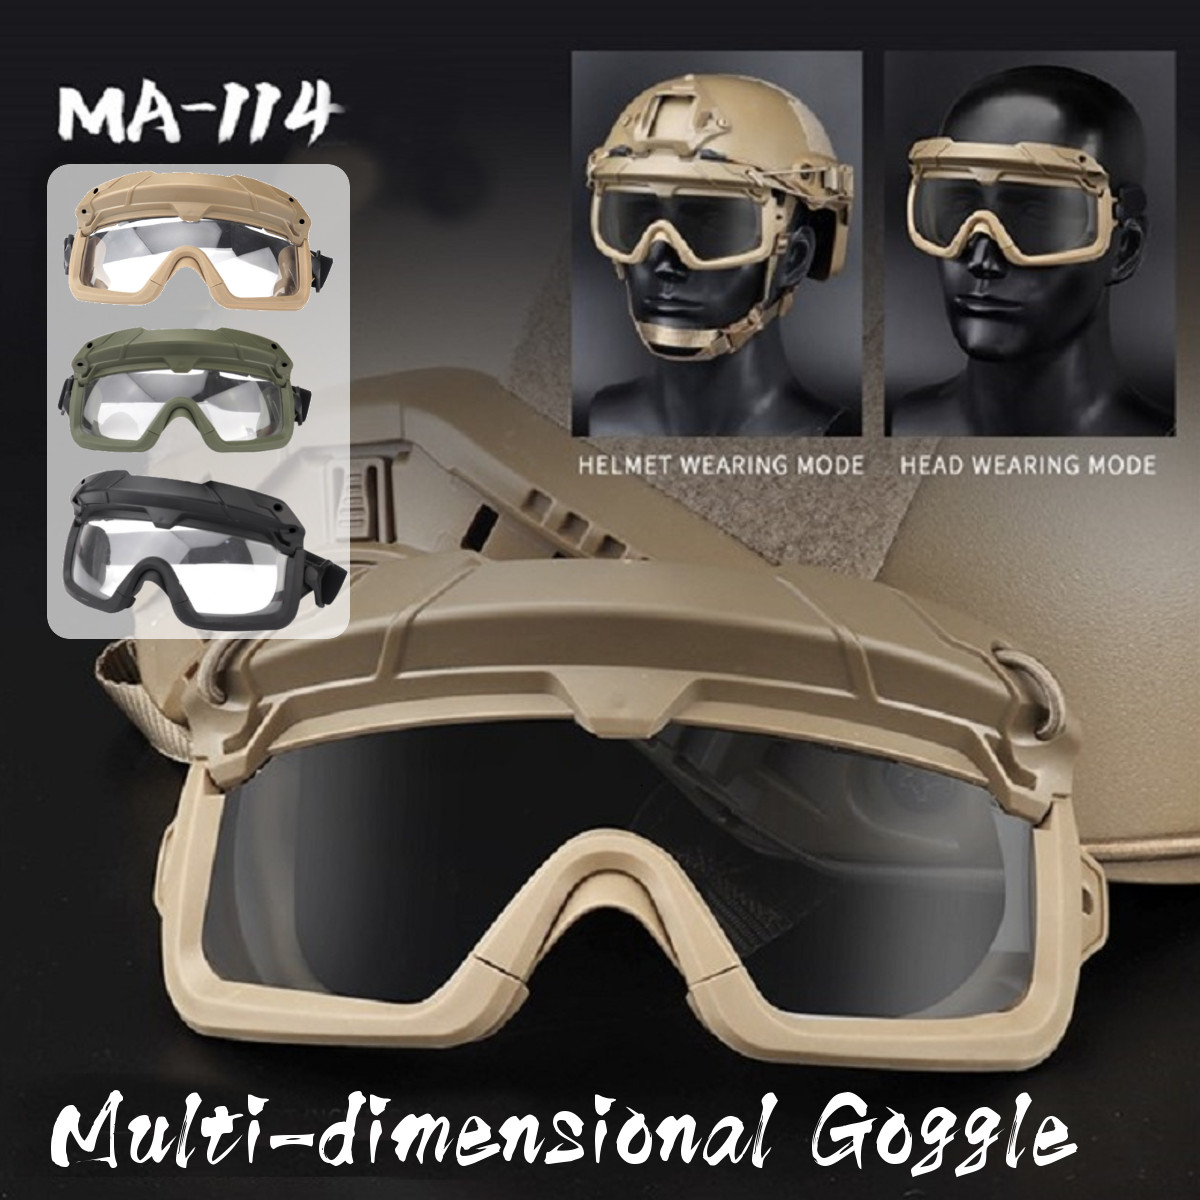 WoSporT-MA-114-Outdoor-Tactical-Glasses-Sunglasses-Cycling-Glasses-CS-Field-Protective-Eyewear-1635053-1